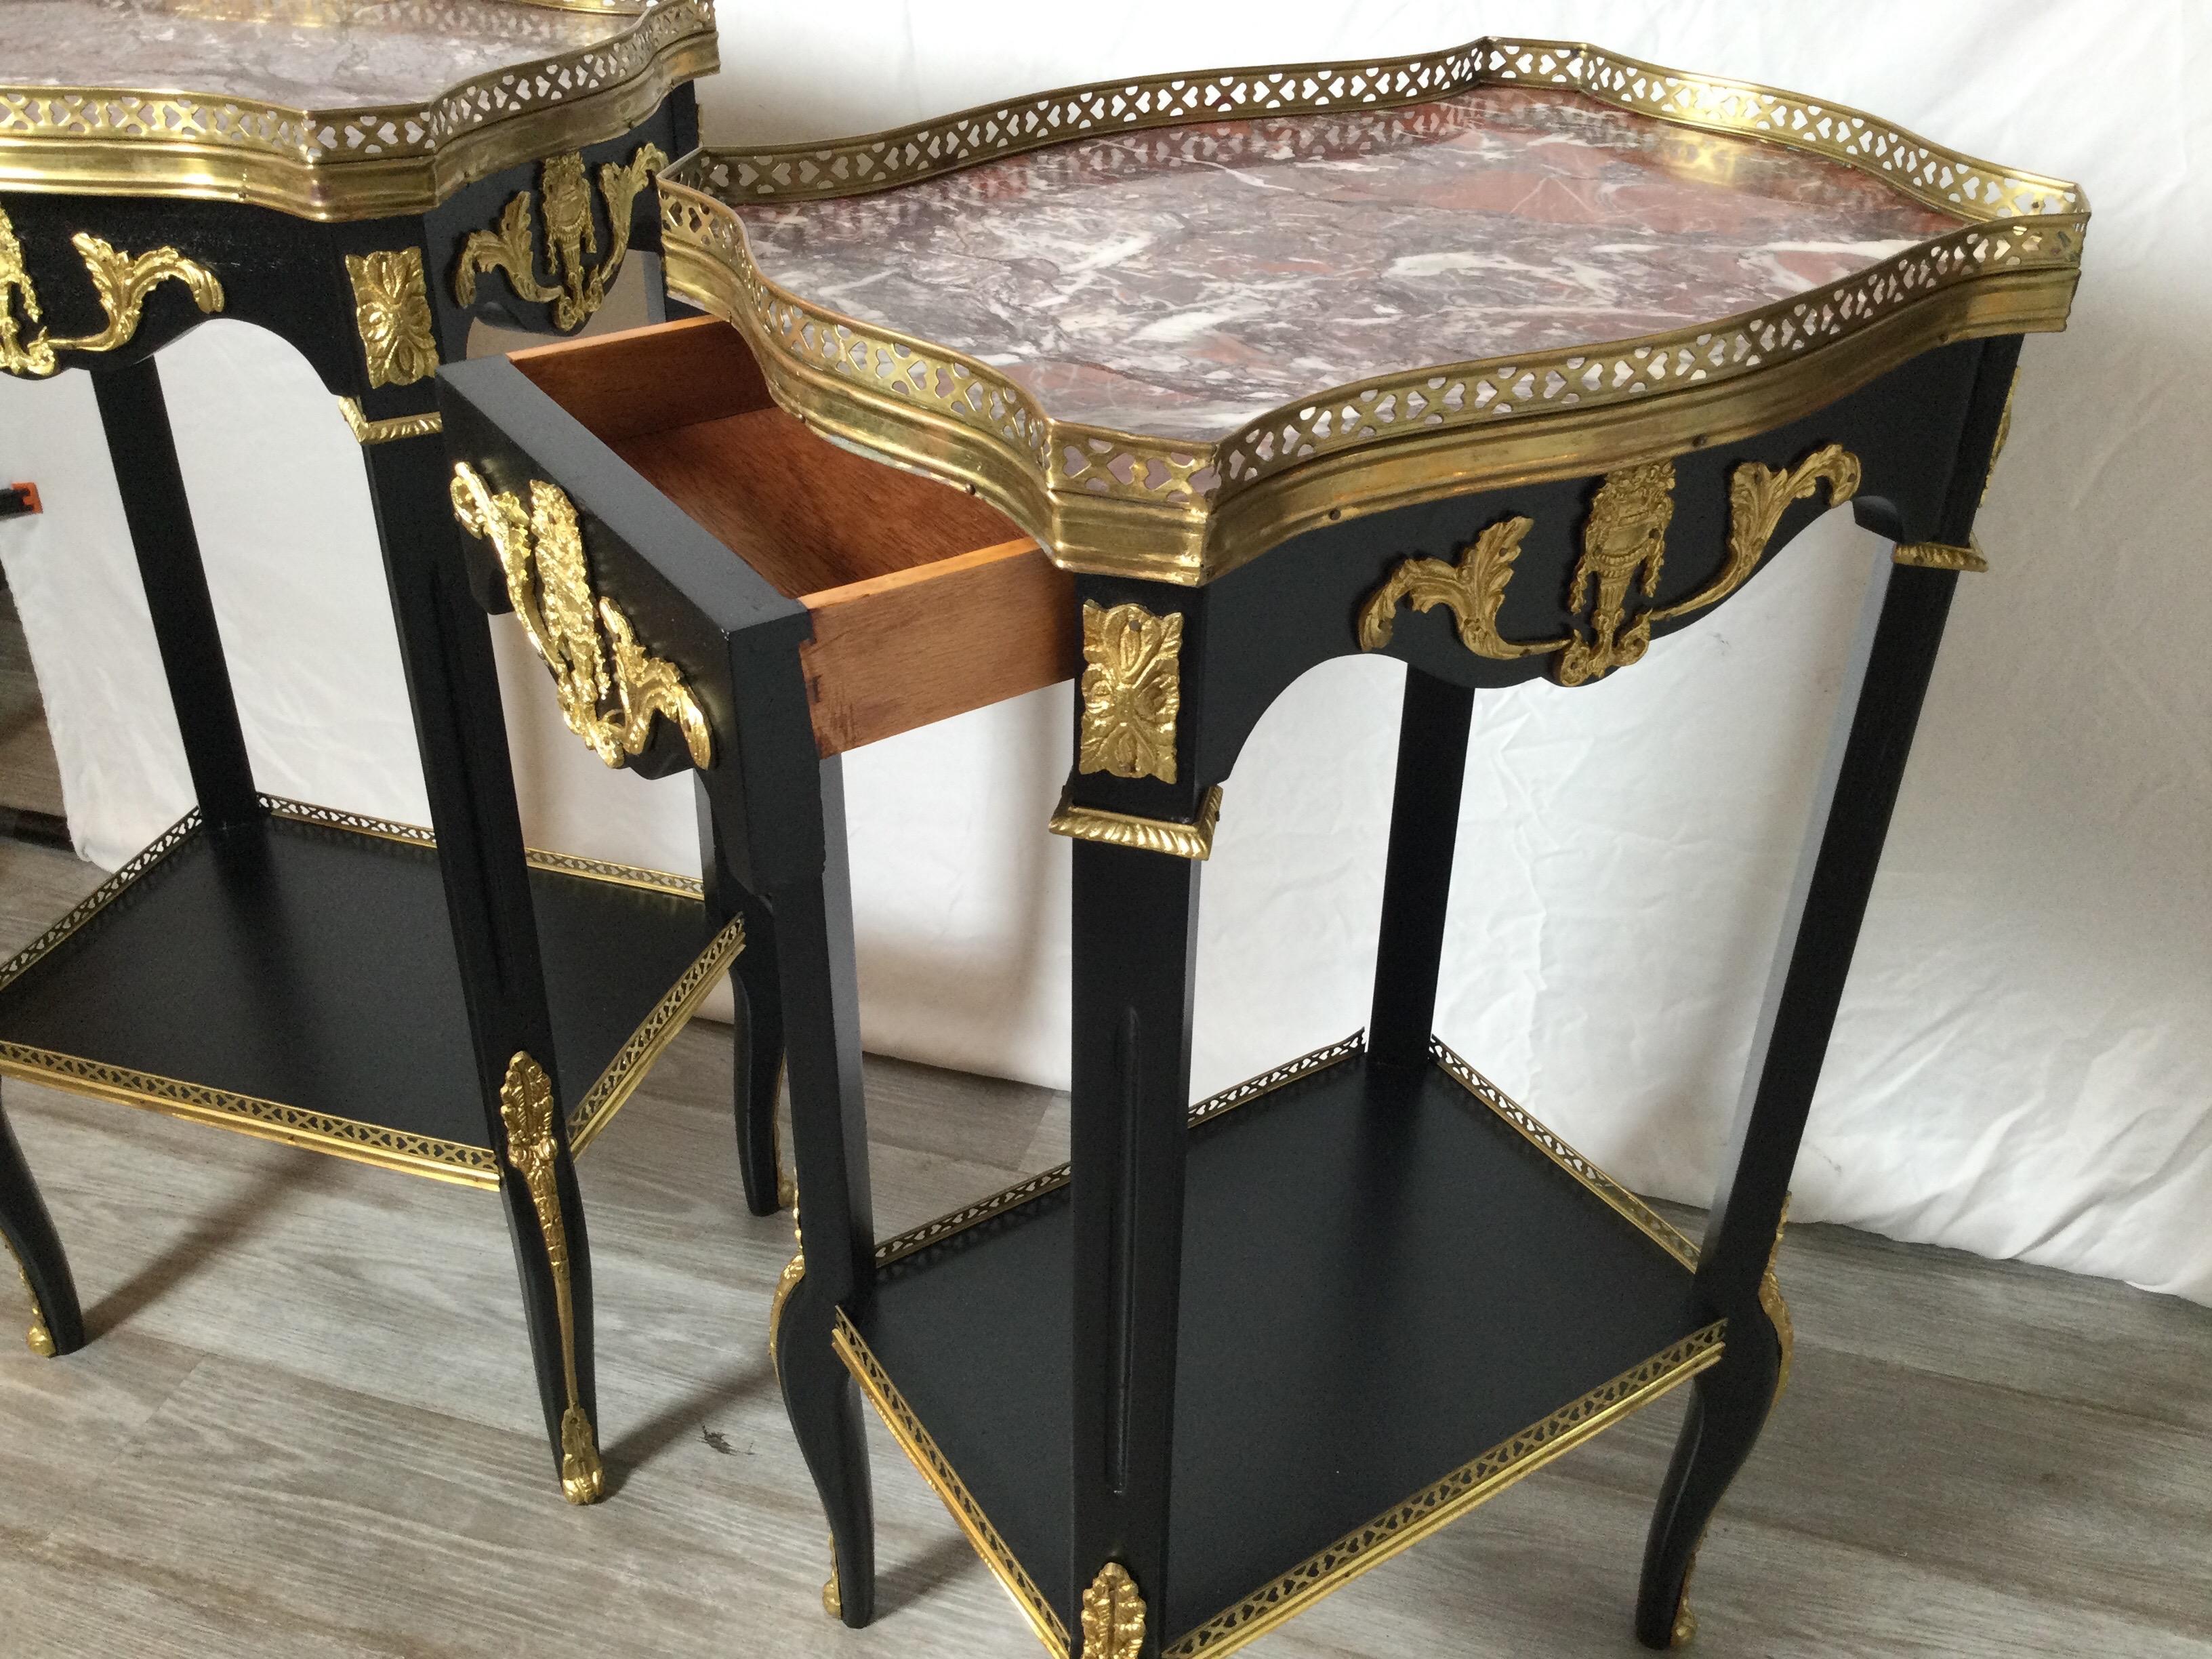 European Pair of Ebonized Wood and Marble Diminutive Side Tables